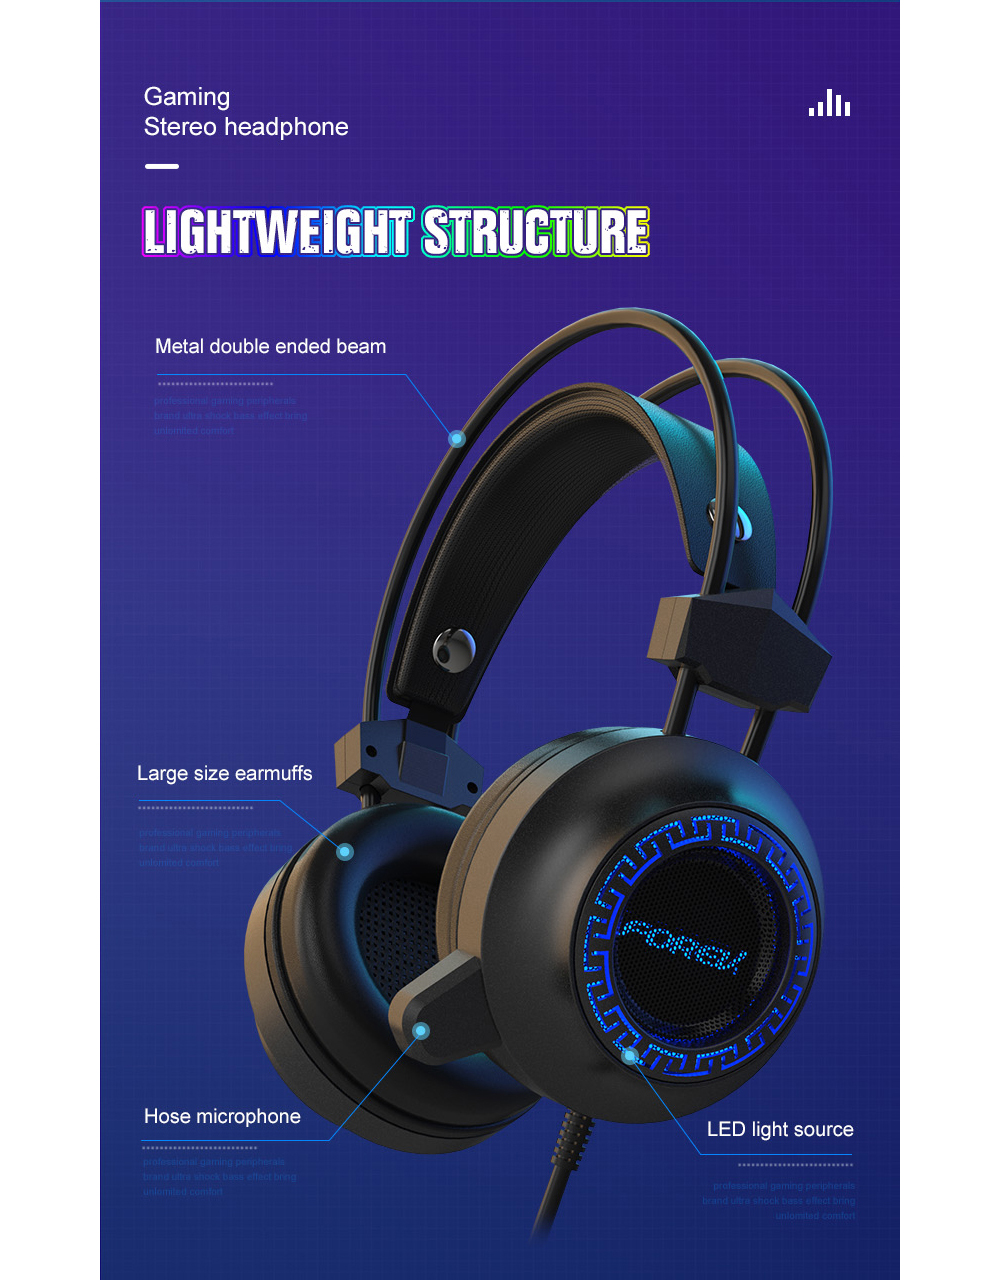 FOREV-FV-G93-Gaming-Headset-71-Channel-50mm-Driver-Stocking-Stereo-Sound-RGB-Cool-Light-Noise-Reduct-1791259-12